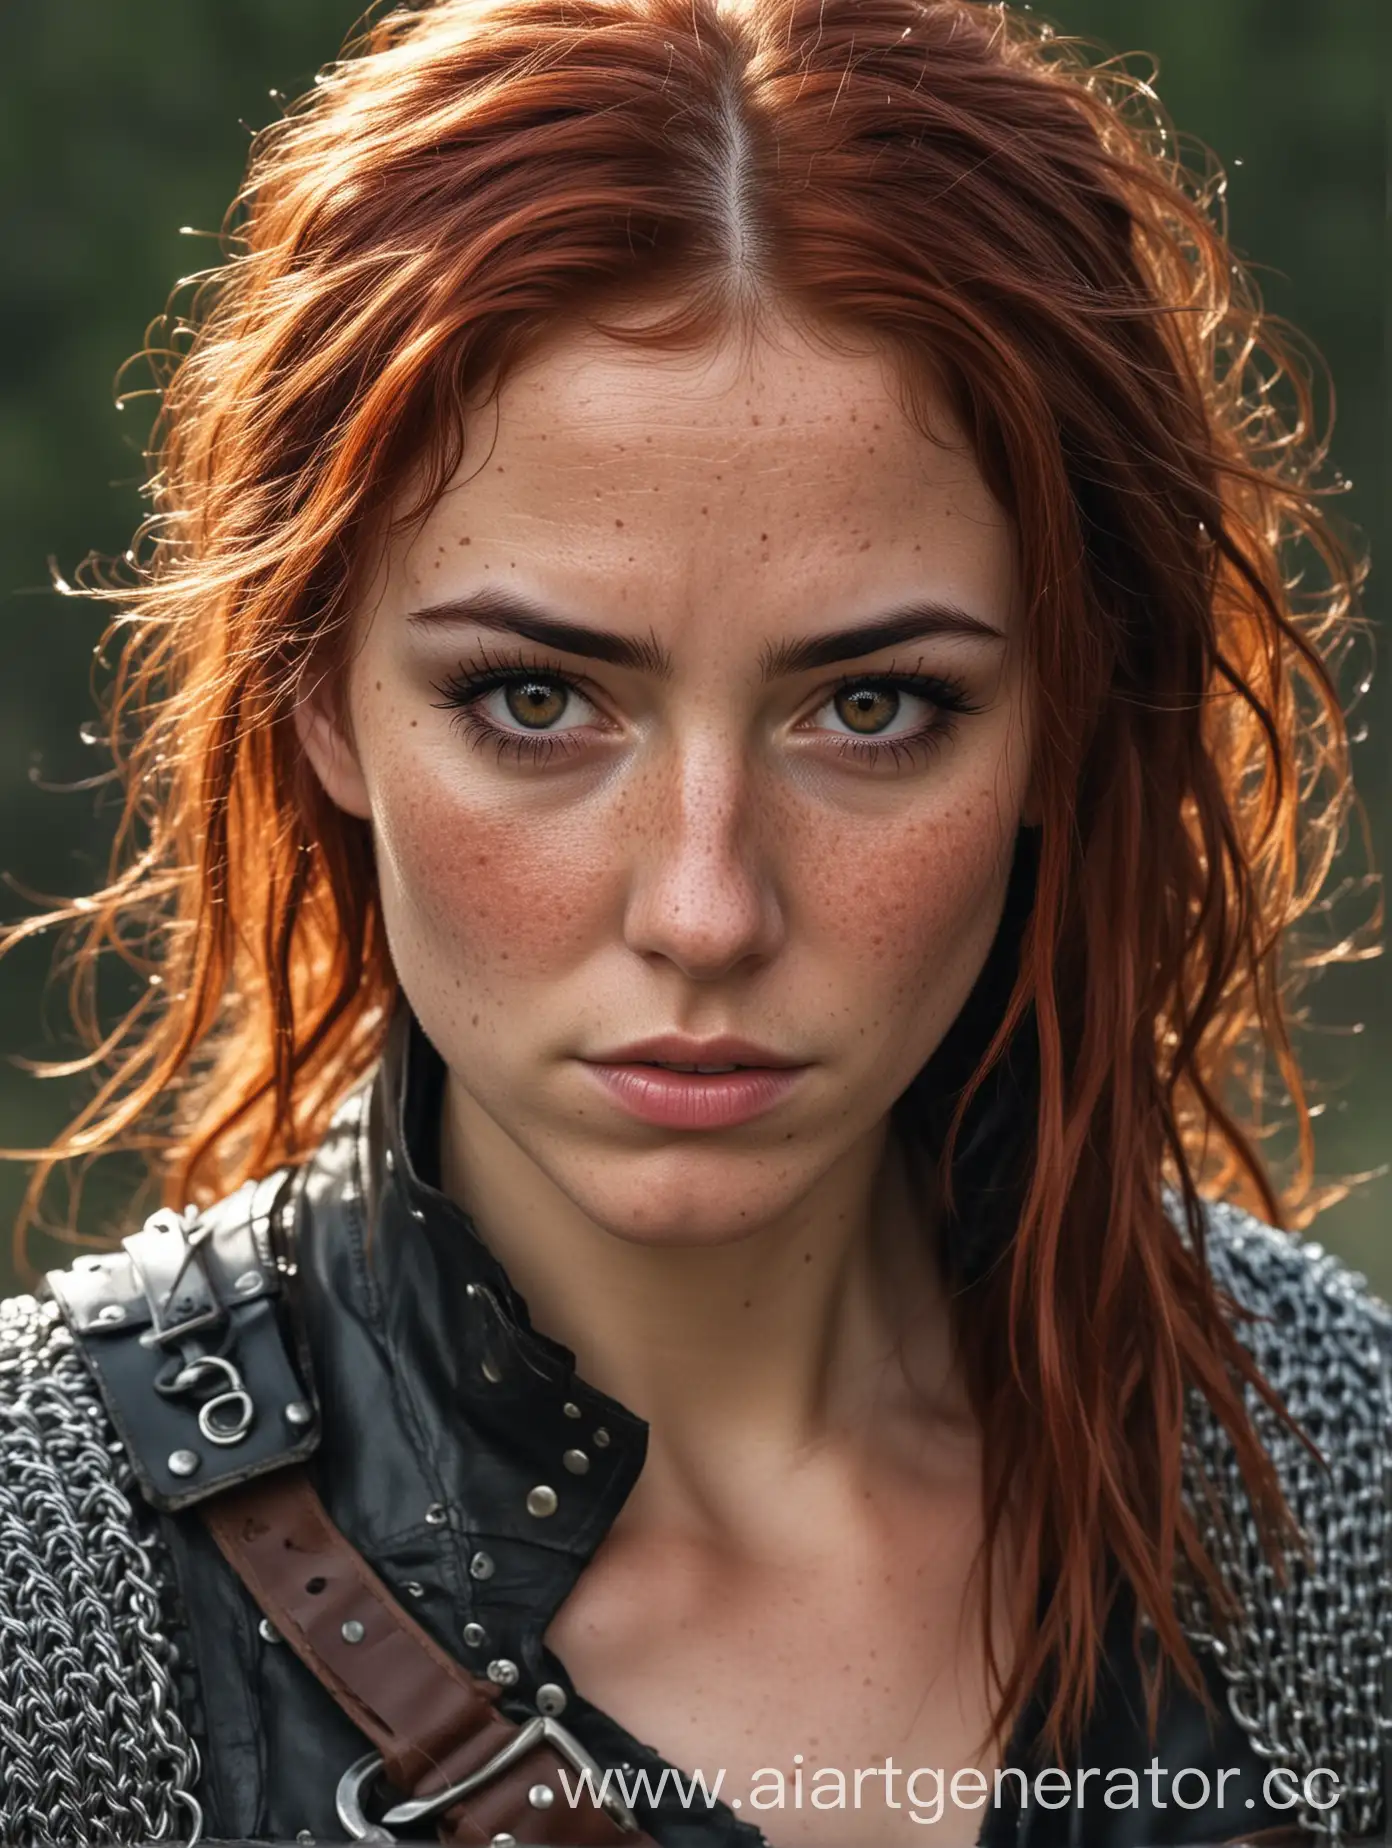 Fierce-Freckled-Warrior-Girl-with-DarkRed-Hair-and-Chainmail-Vest